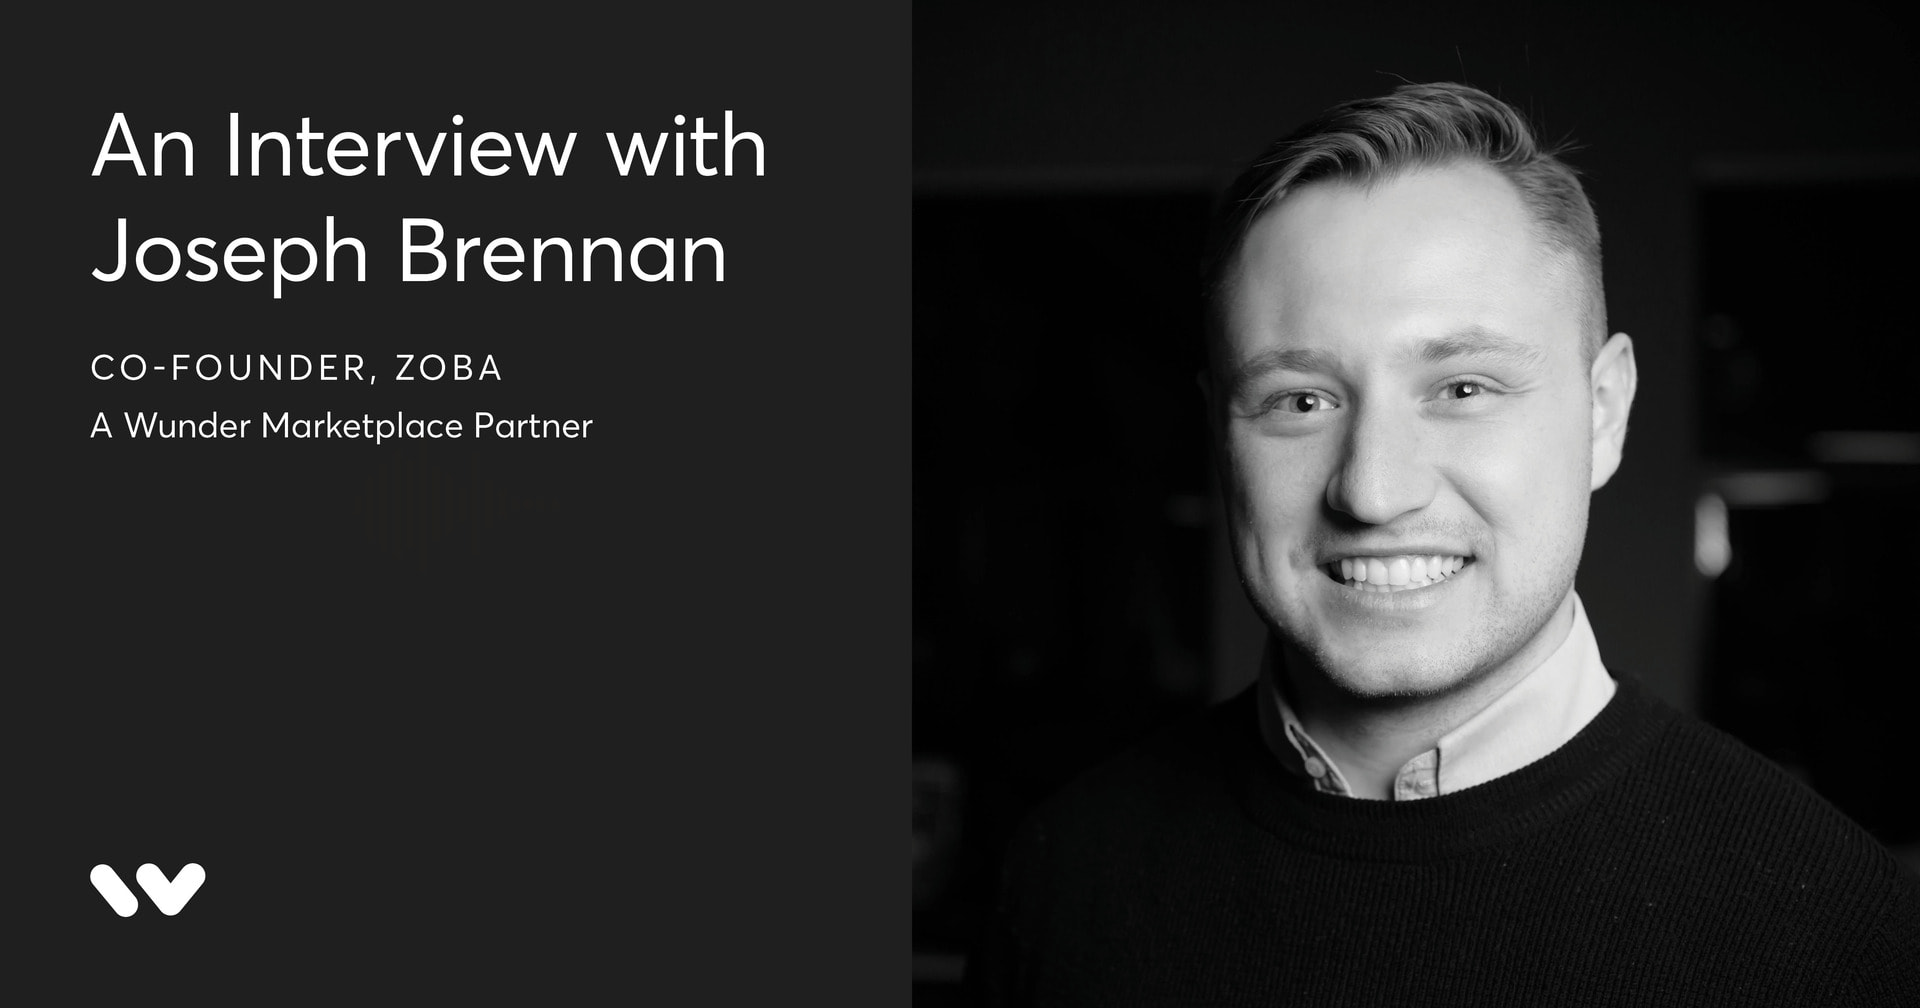 Template titled "An Interview with Joseph Brennan co-founder Zoba, a Wunder Marketplace Partner".